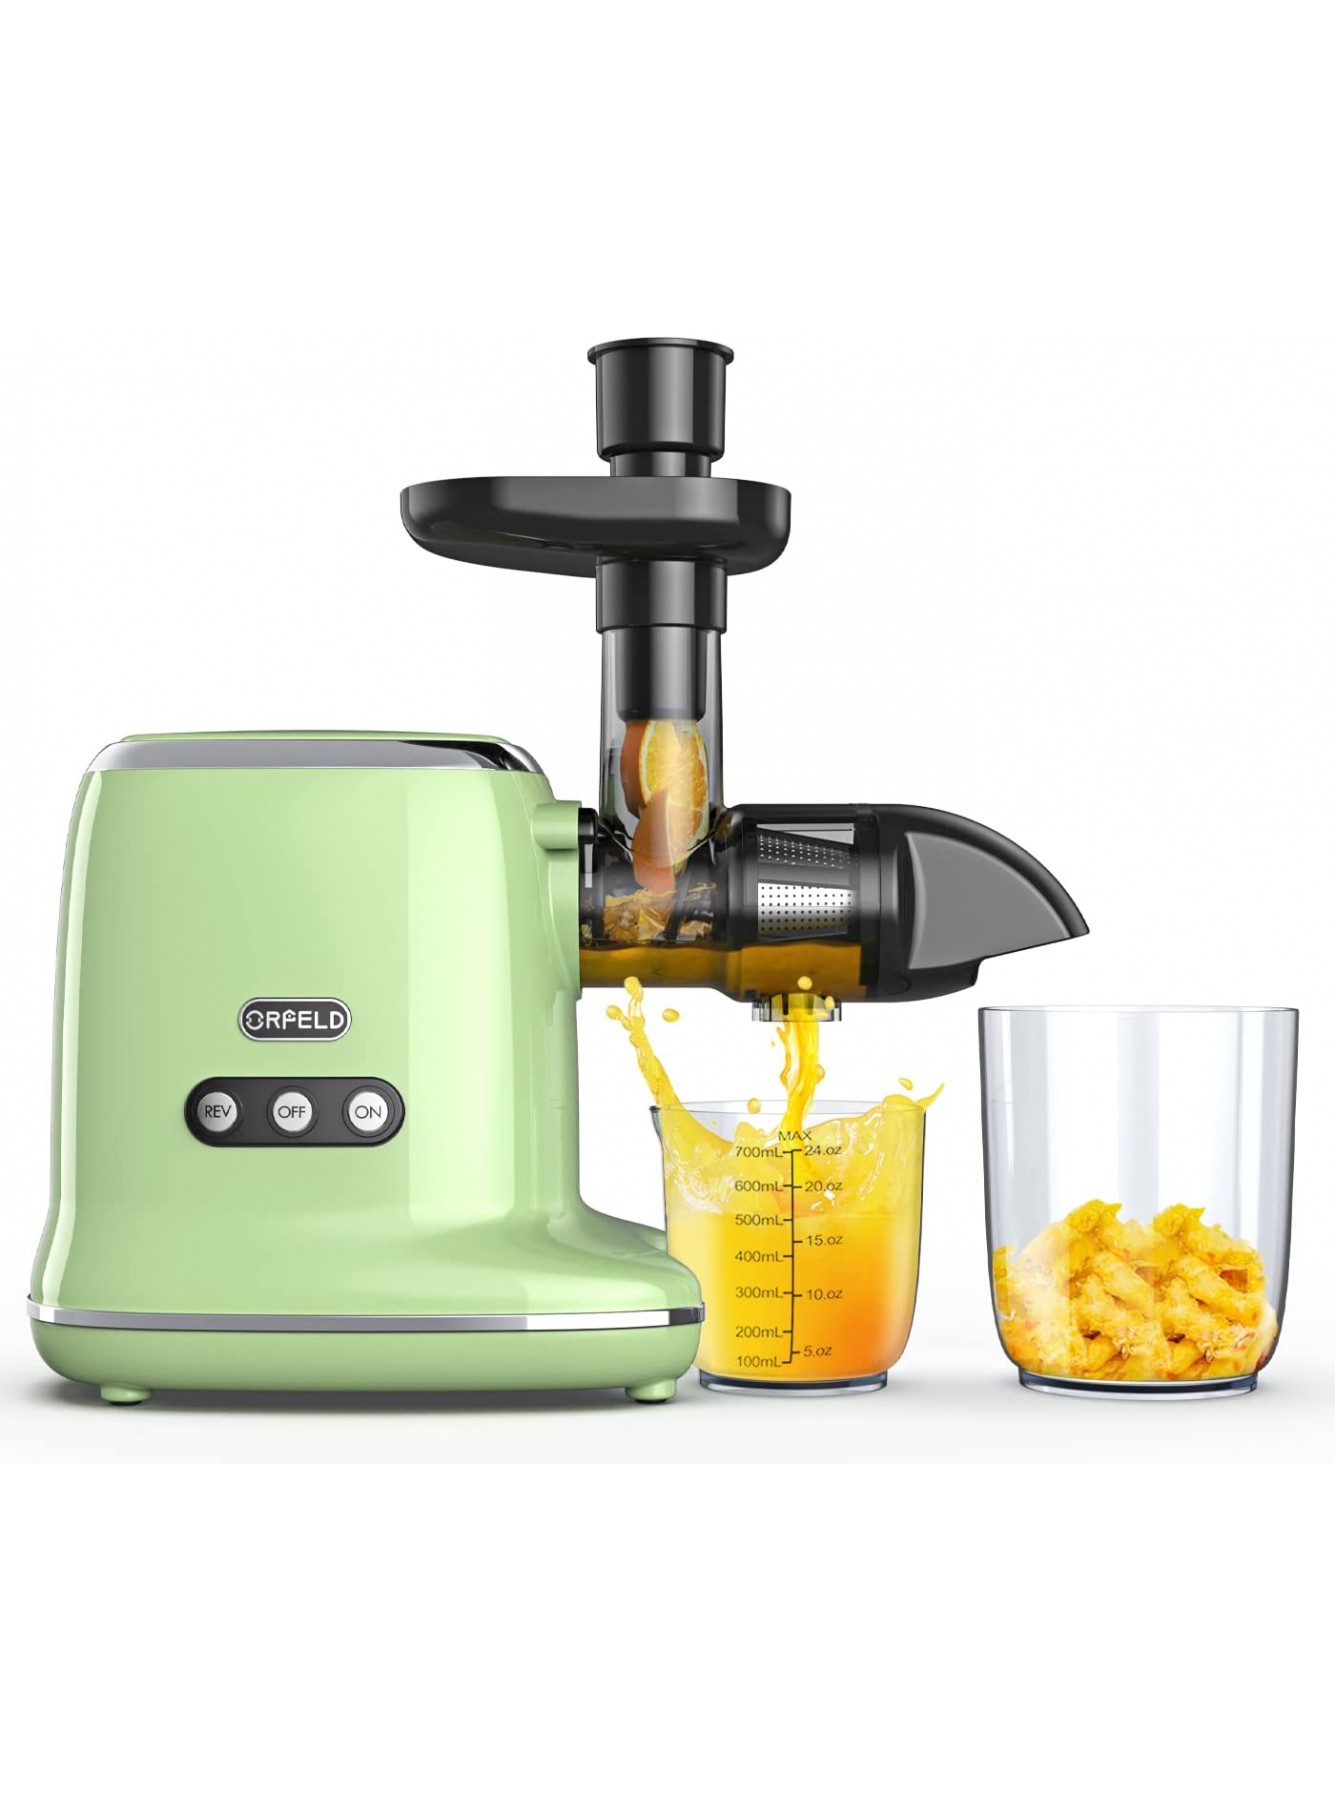 Juicer Machines ORFELD Cold Press Juicer with 92% Juice Yield & Purest Juice Easy Cleaning & Quiet Motor Juice Extractor for Vegetables and Fruits Green B09D95BTFM